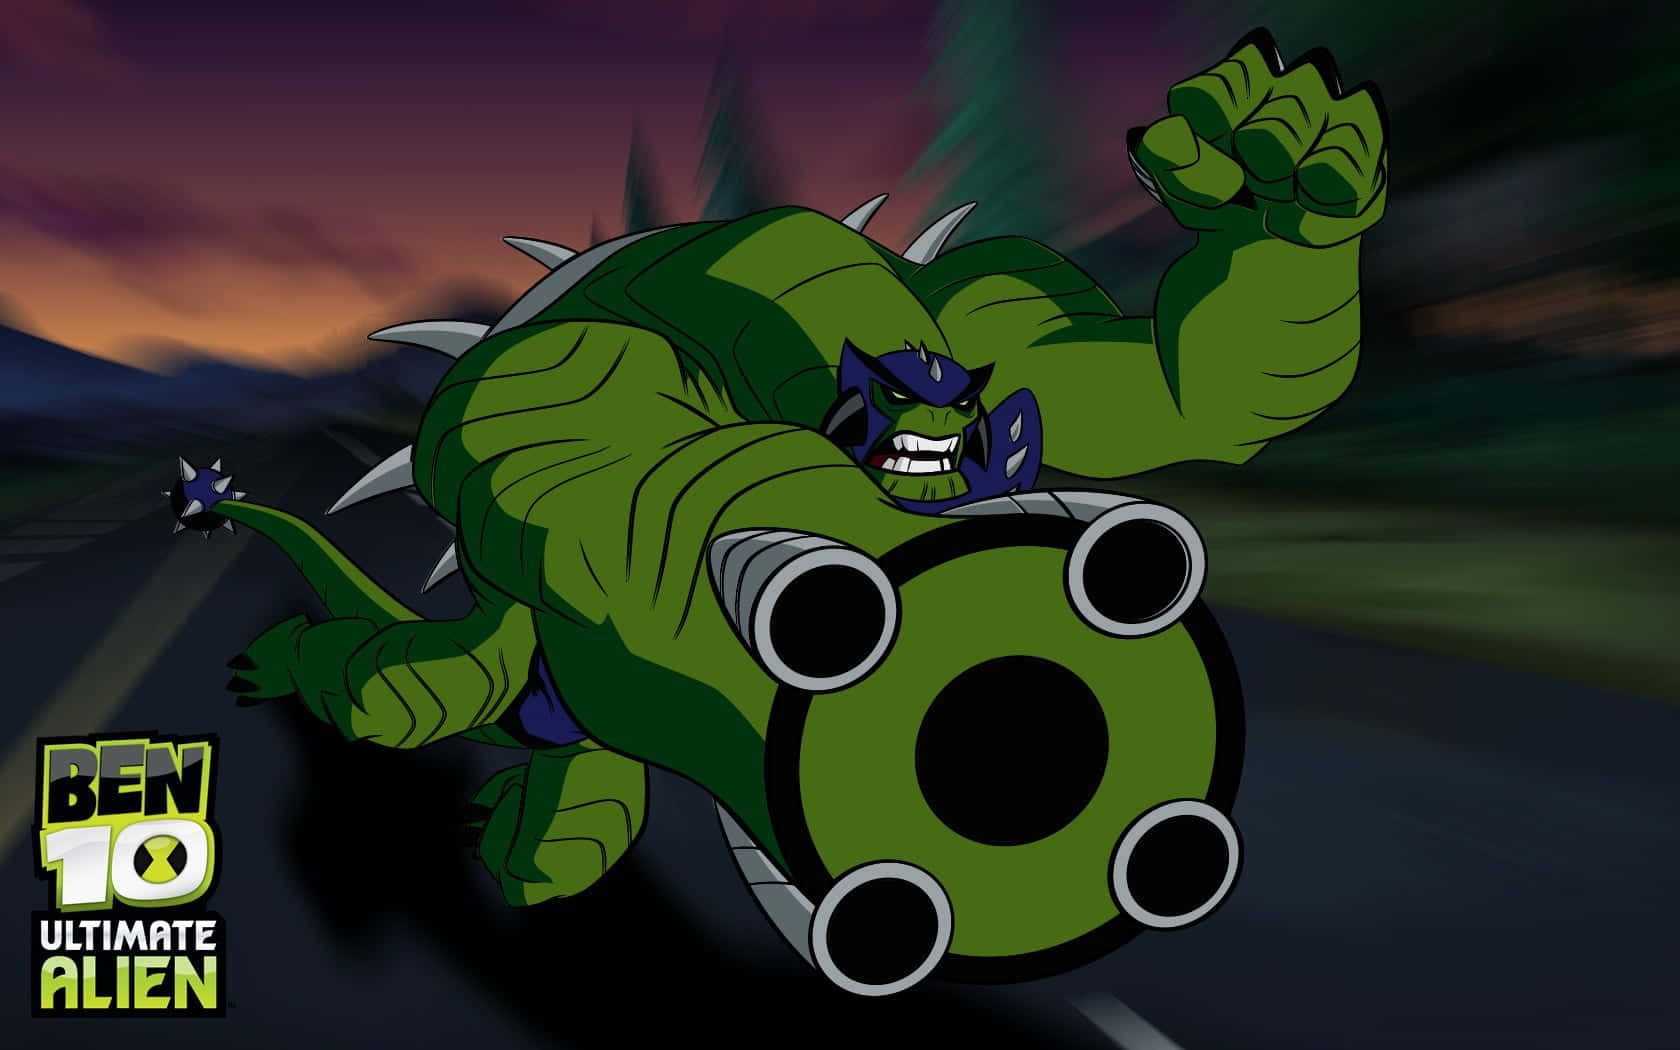 The Ultimate Hero! Ben 10 in action with his Omnitrix.